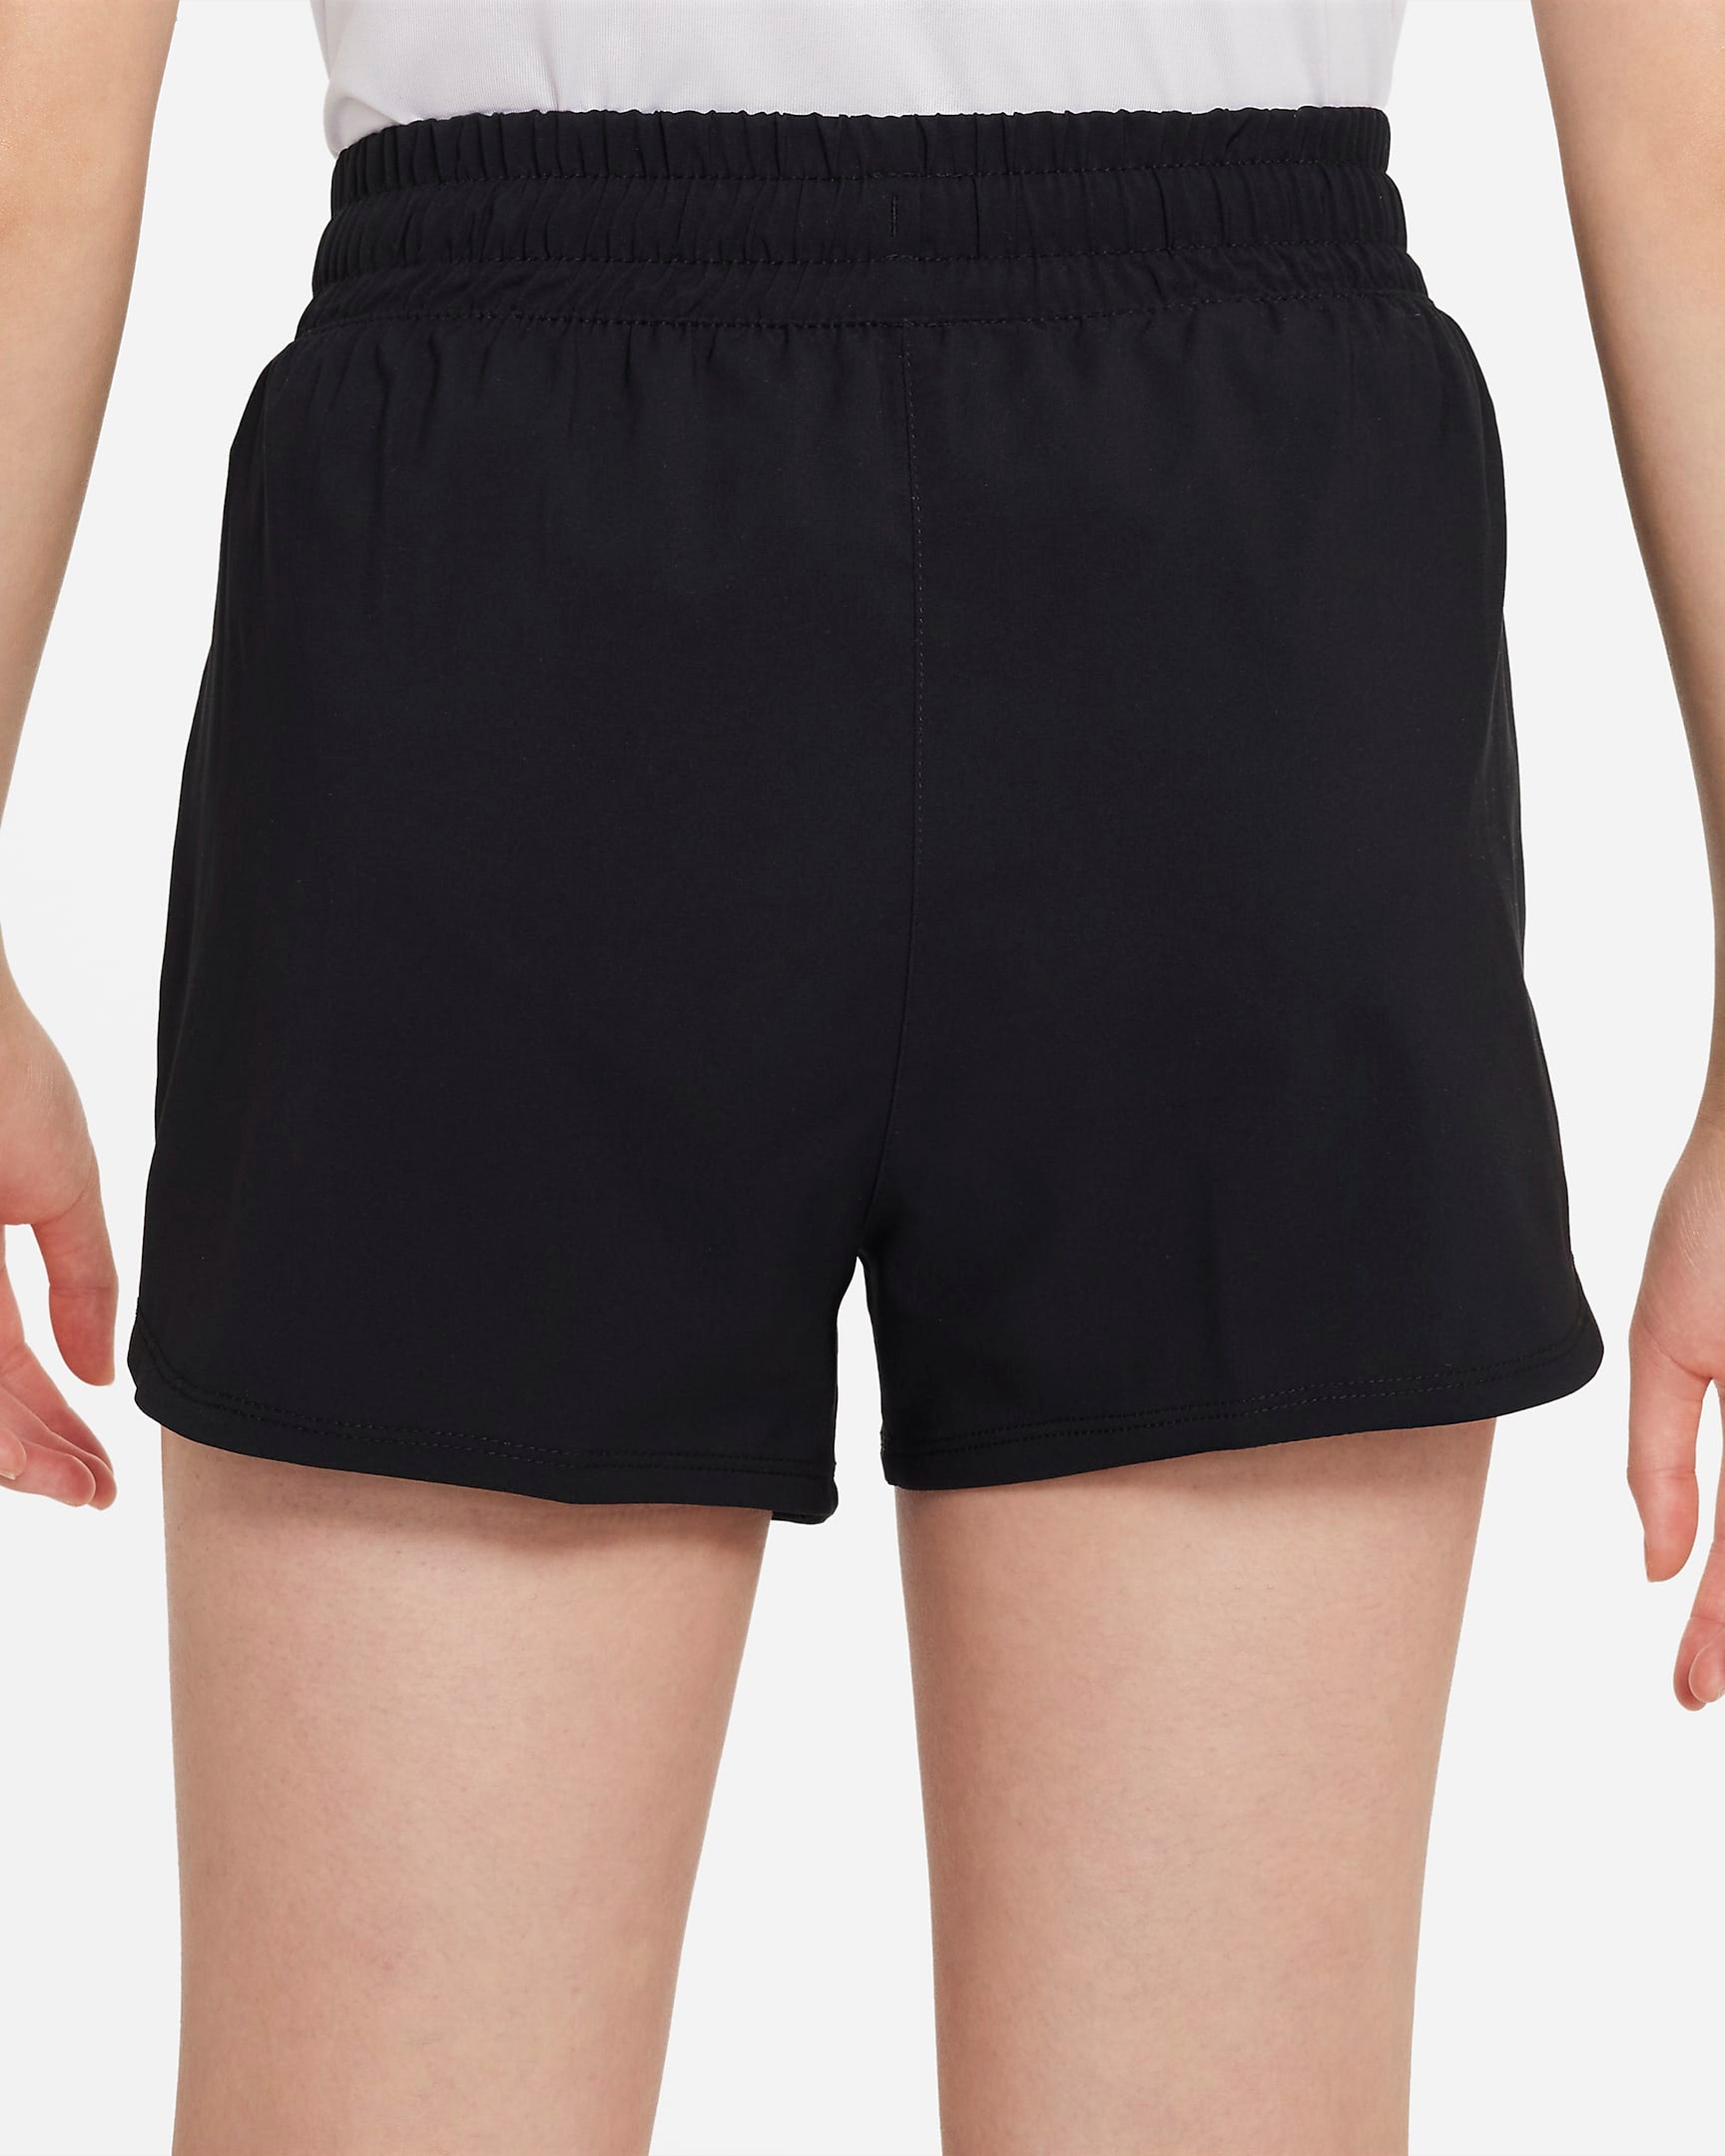 NIKE DRI-FIT HIGH-WAISTED WOVEN SHORTS - DX4967